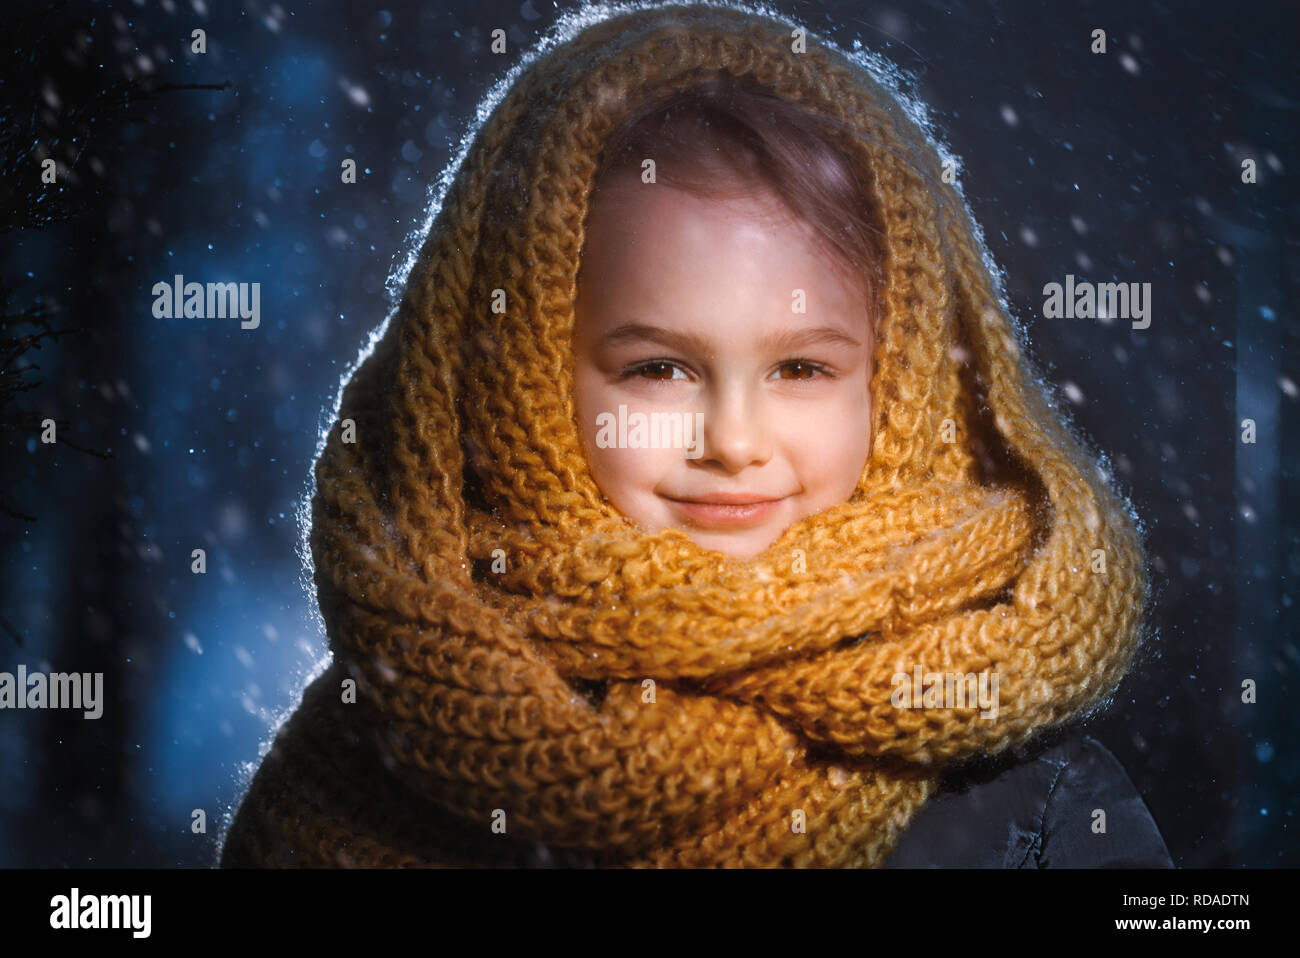 Portrait of a little charming girl in a yellow wool scarf standing outside during a snow blizzard. Stock Photo